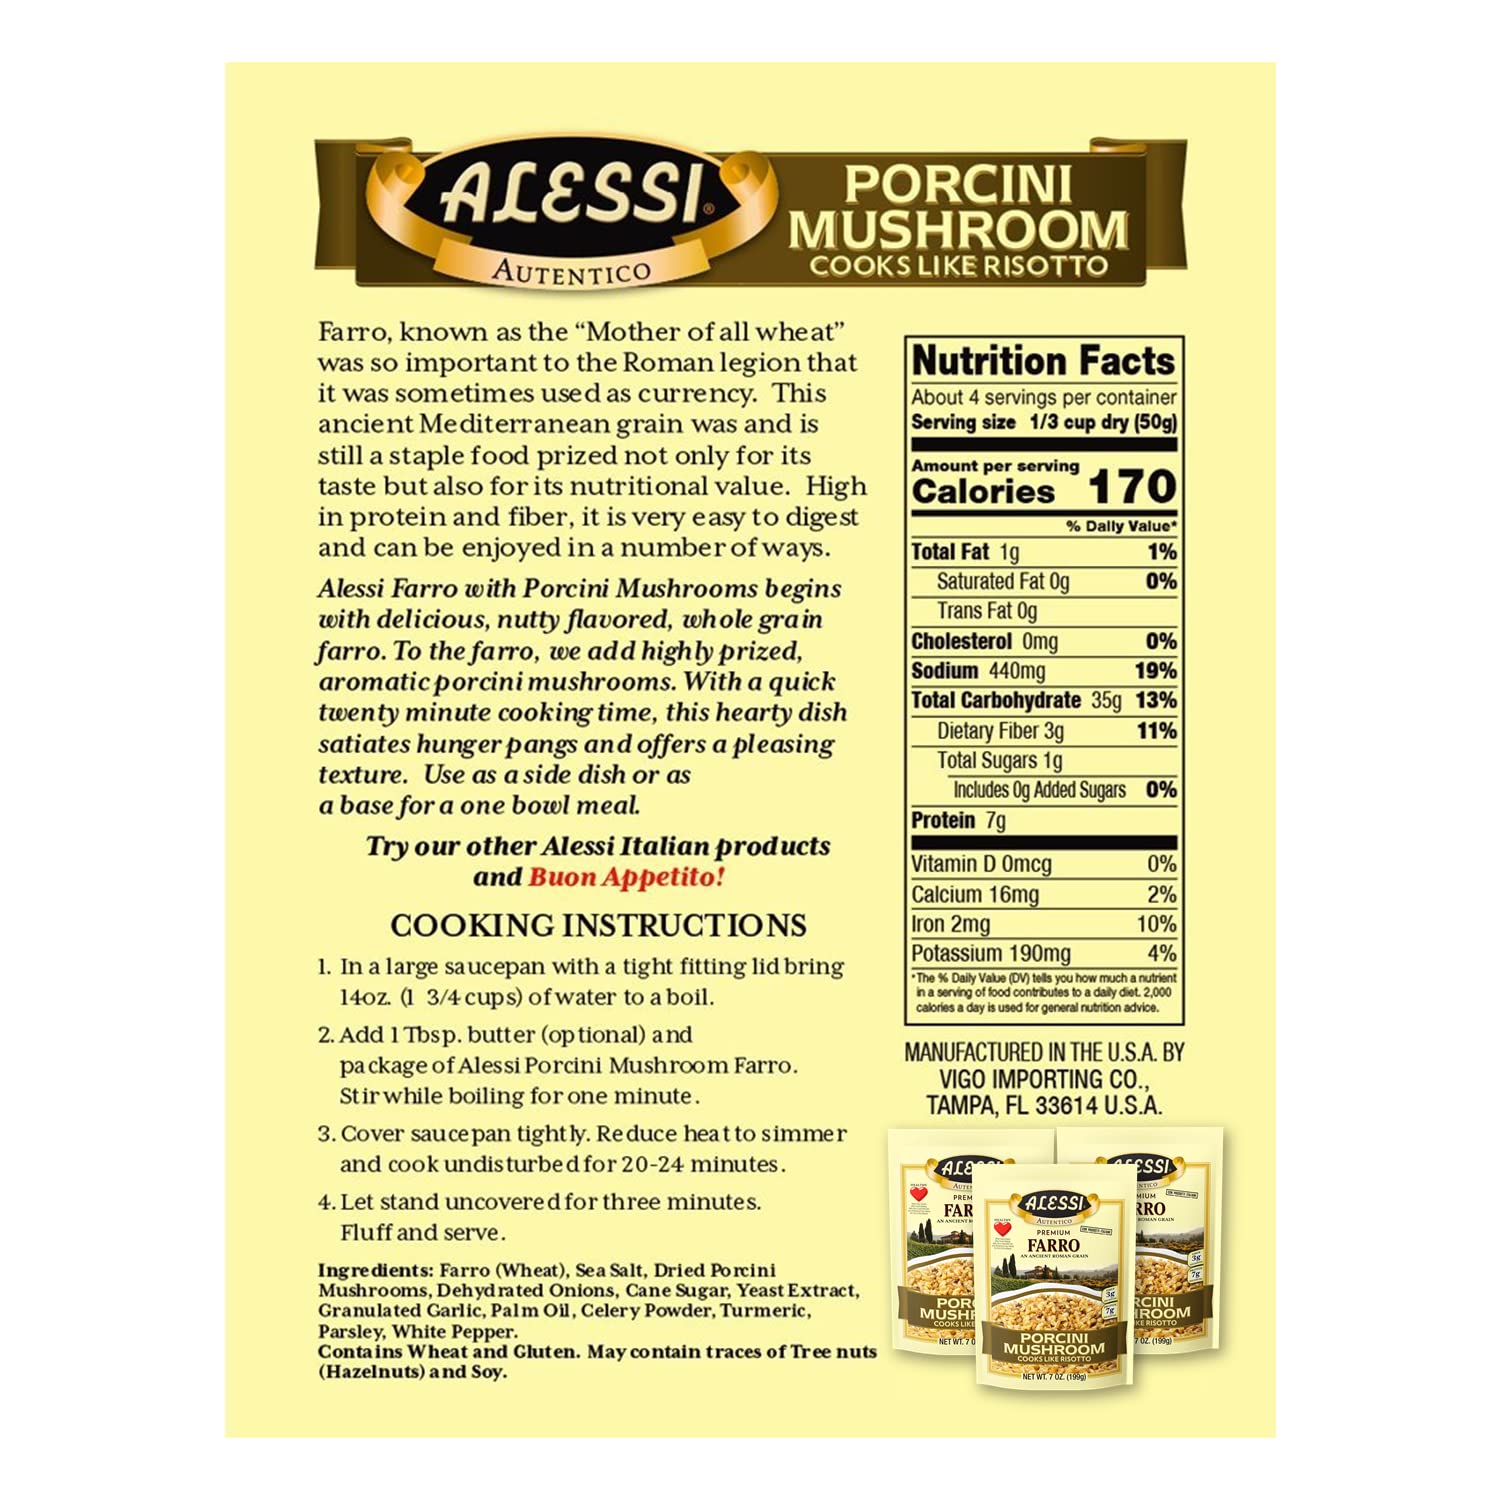 Alessi Autentico, Premium Seasoned Roman Grain Farro, Cooks Like Risotto, Heart Healthy, Easy to Prepare, 7oz (Variety Pack, Pack of 3) : Grocery & Gourmet Food